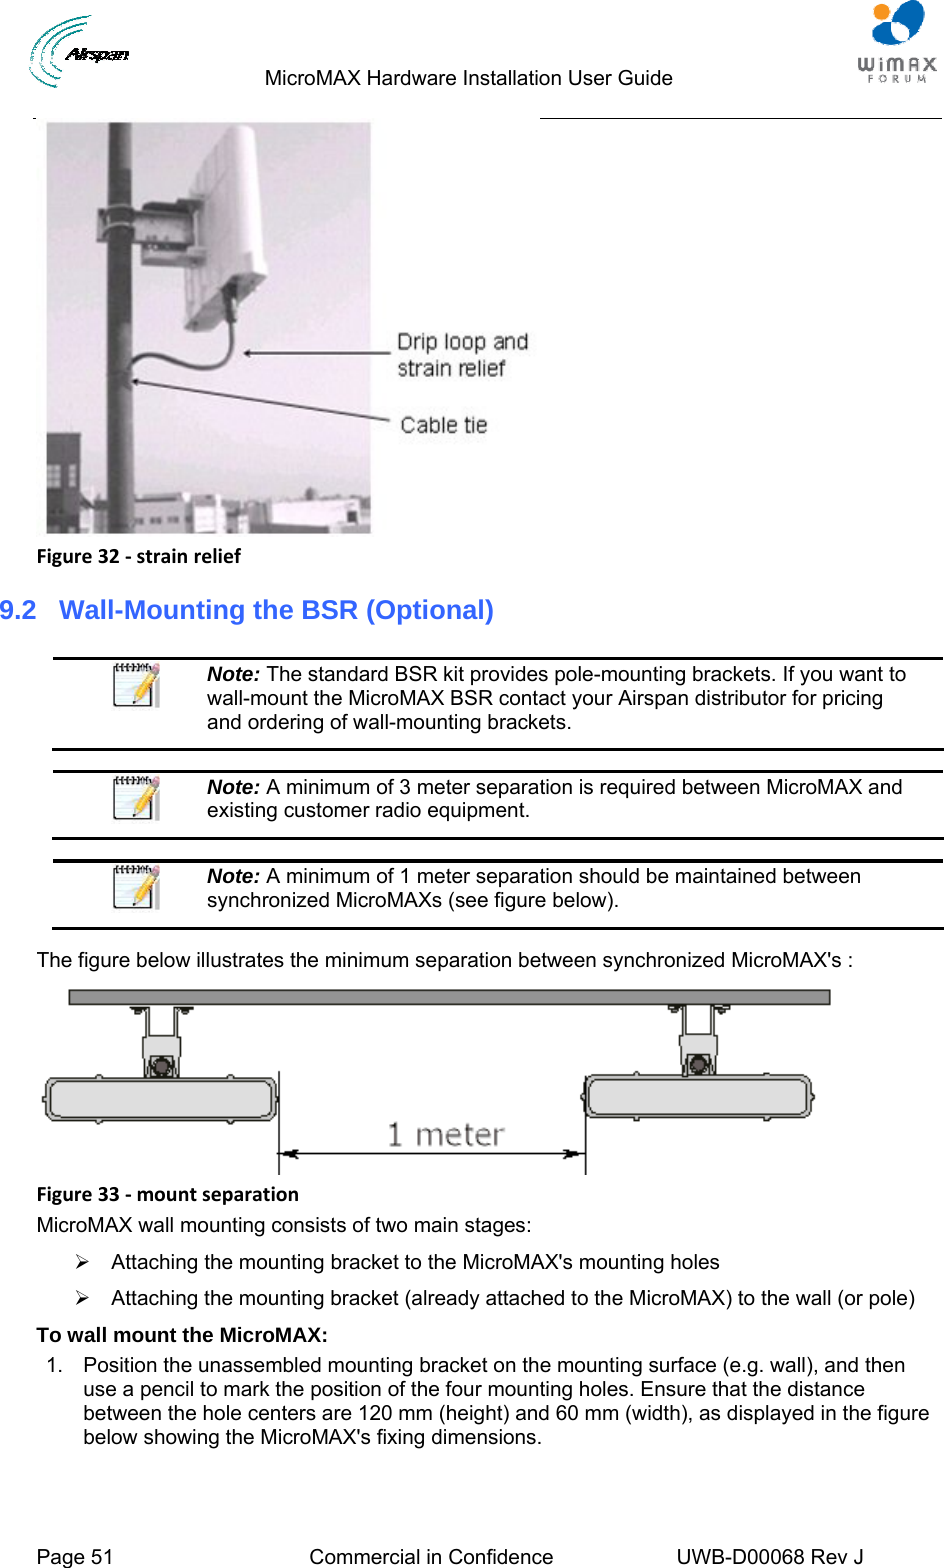                                  MicroMAX Hardware Installation User Guide  Page 51  Commercial in Confidence  UWB-D00068 Rev J    Figure32‐strainrelief9.2  Wall-Mounting the BSR (Optional)   Note: The standard BSR kit provides pole-mounting brackets. If you want to wall-mount the MicroMAX BSR contact your Airspan distributor for pricing and ordering of wall-mounting brackets.   Note: A minimum of 3 meter separation is required between MicroMAX and existing customer radio equipment.   Note: A minimum of 1 meter separation should be maintained between synchronized MicroMAXs (see figure below).  The figure below illustrates the minimum separation between synchronized MicroMAX&apos;s :  Figure33‐mountseparationMicroMAX wall mounting consists of two main stages: ¾  Attaching the mounting bracket to the MicroMAX&apos;s mounting holes ¾  Attaching the mounting bracket (already attached to the MicroMAX) to the wall (or pole) To wall mount the MicroMAX: 1.  Position the unassembled mounting bracket on the mounting surface (e.g. wall), and then use a pencil to mark the position of the four mounting holes. Ensure that the distance between the hole centers are 120 mm (height) and 60 mm (width), as displayed in the figure below showing the MicroMAX&apos;s fixing dimensions. 